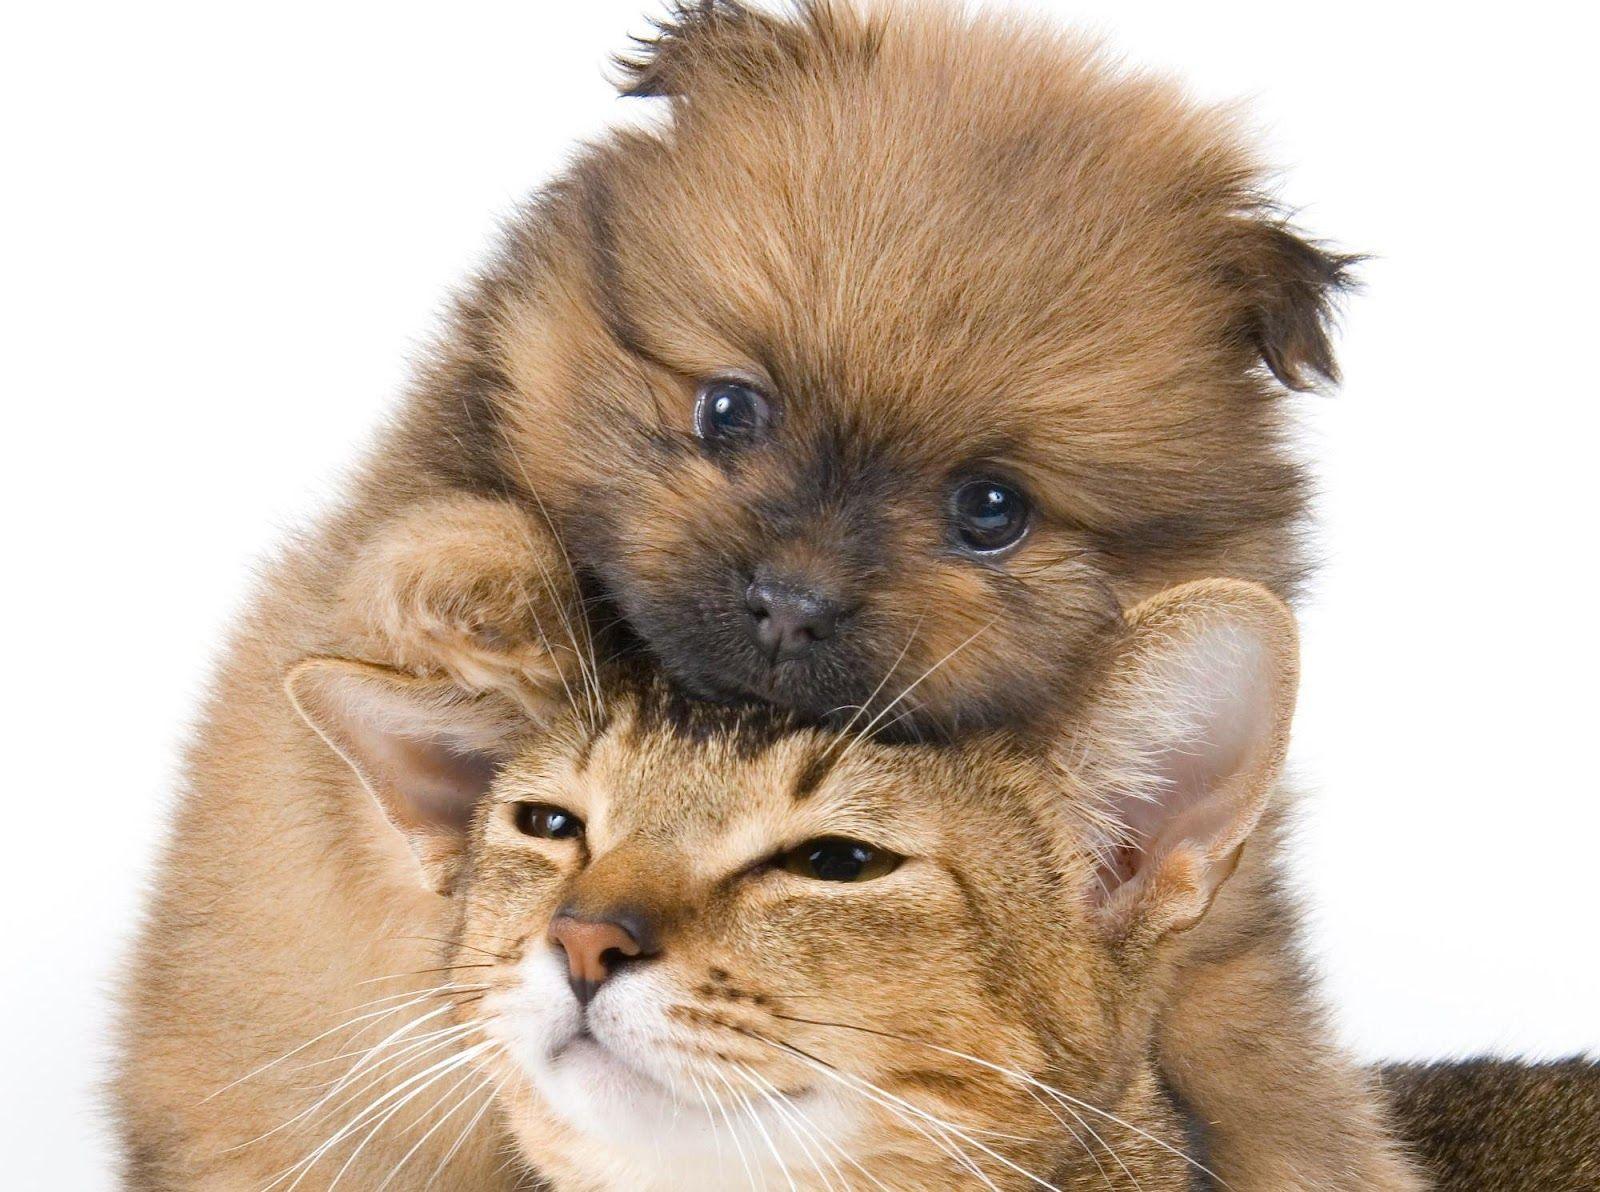 Cats and Dogs Wallpapers - Top Free Cats and Dogs Backgrounds